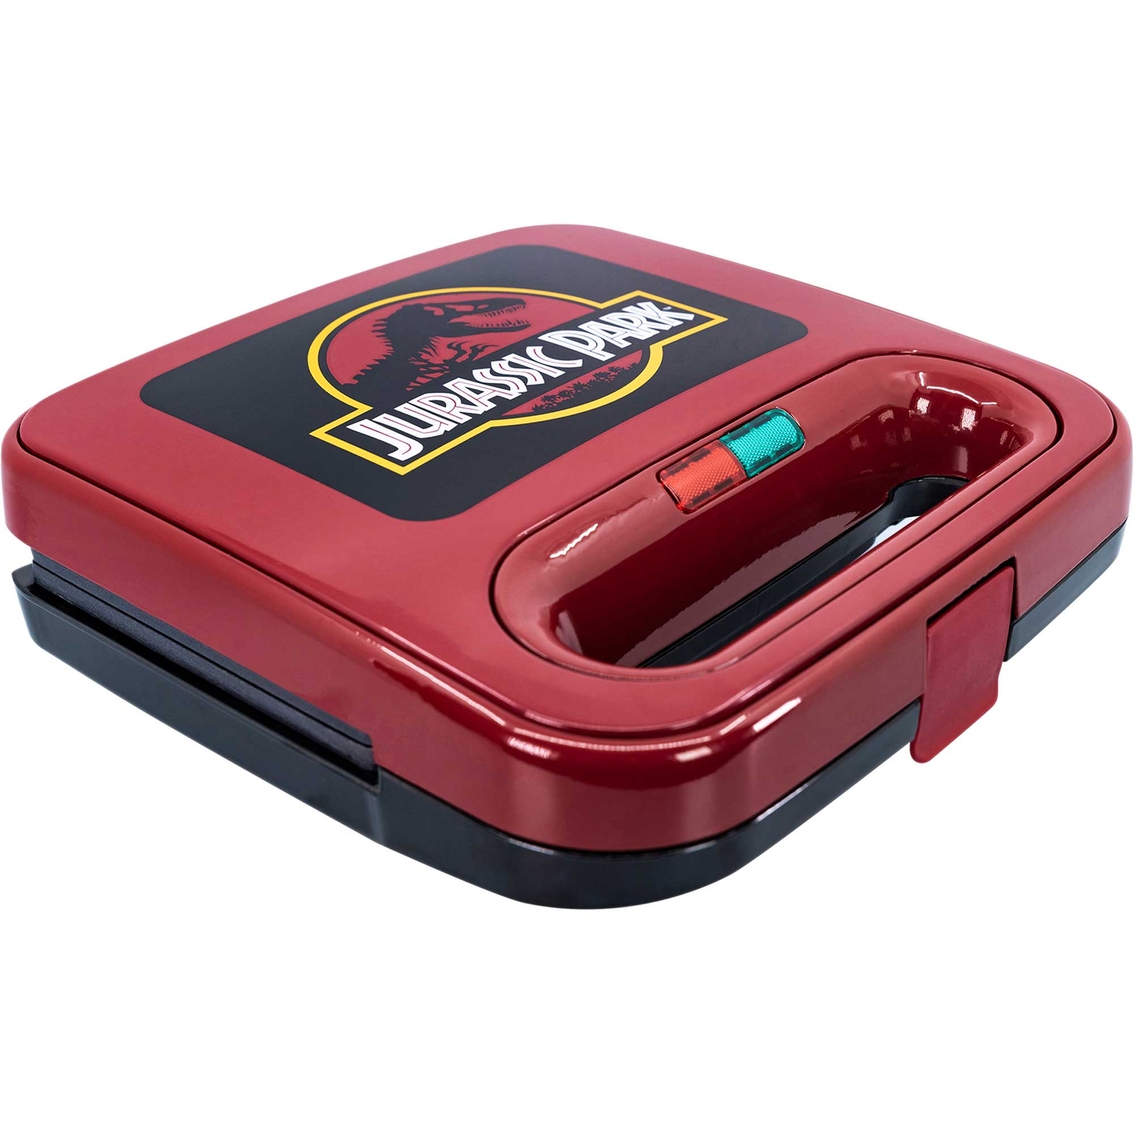 Jurassic Park Grilled Cheese Maker - Image 3 of 6